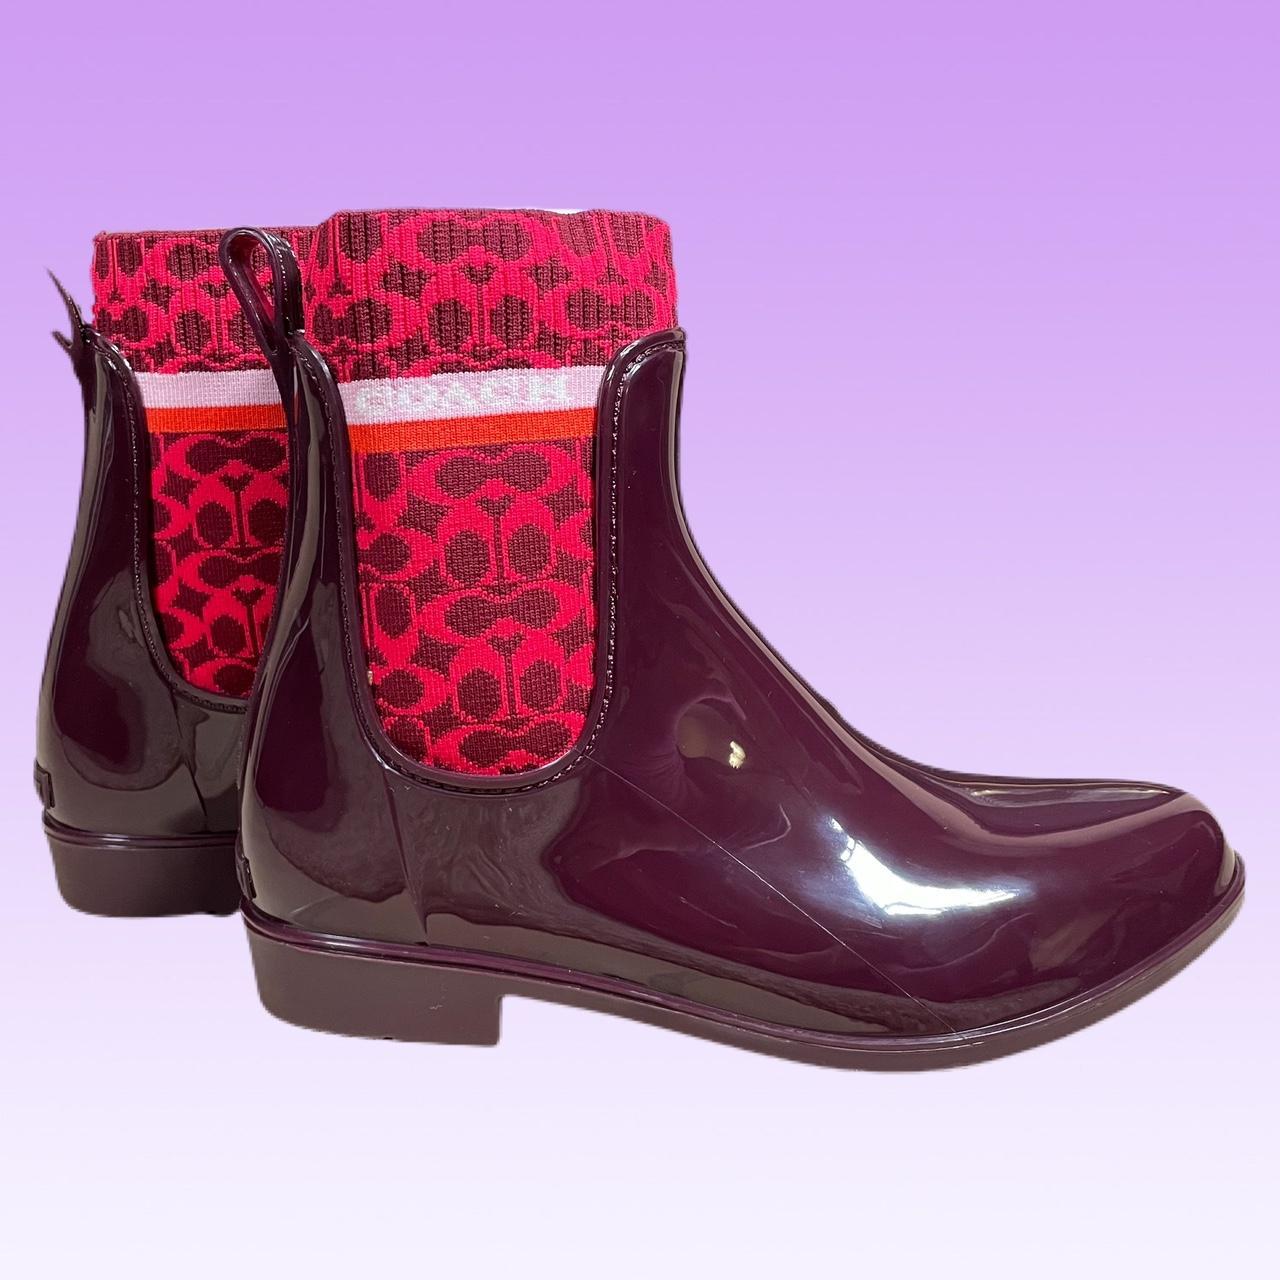 Coach Women's Burgundy and Red Boots (2)